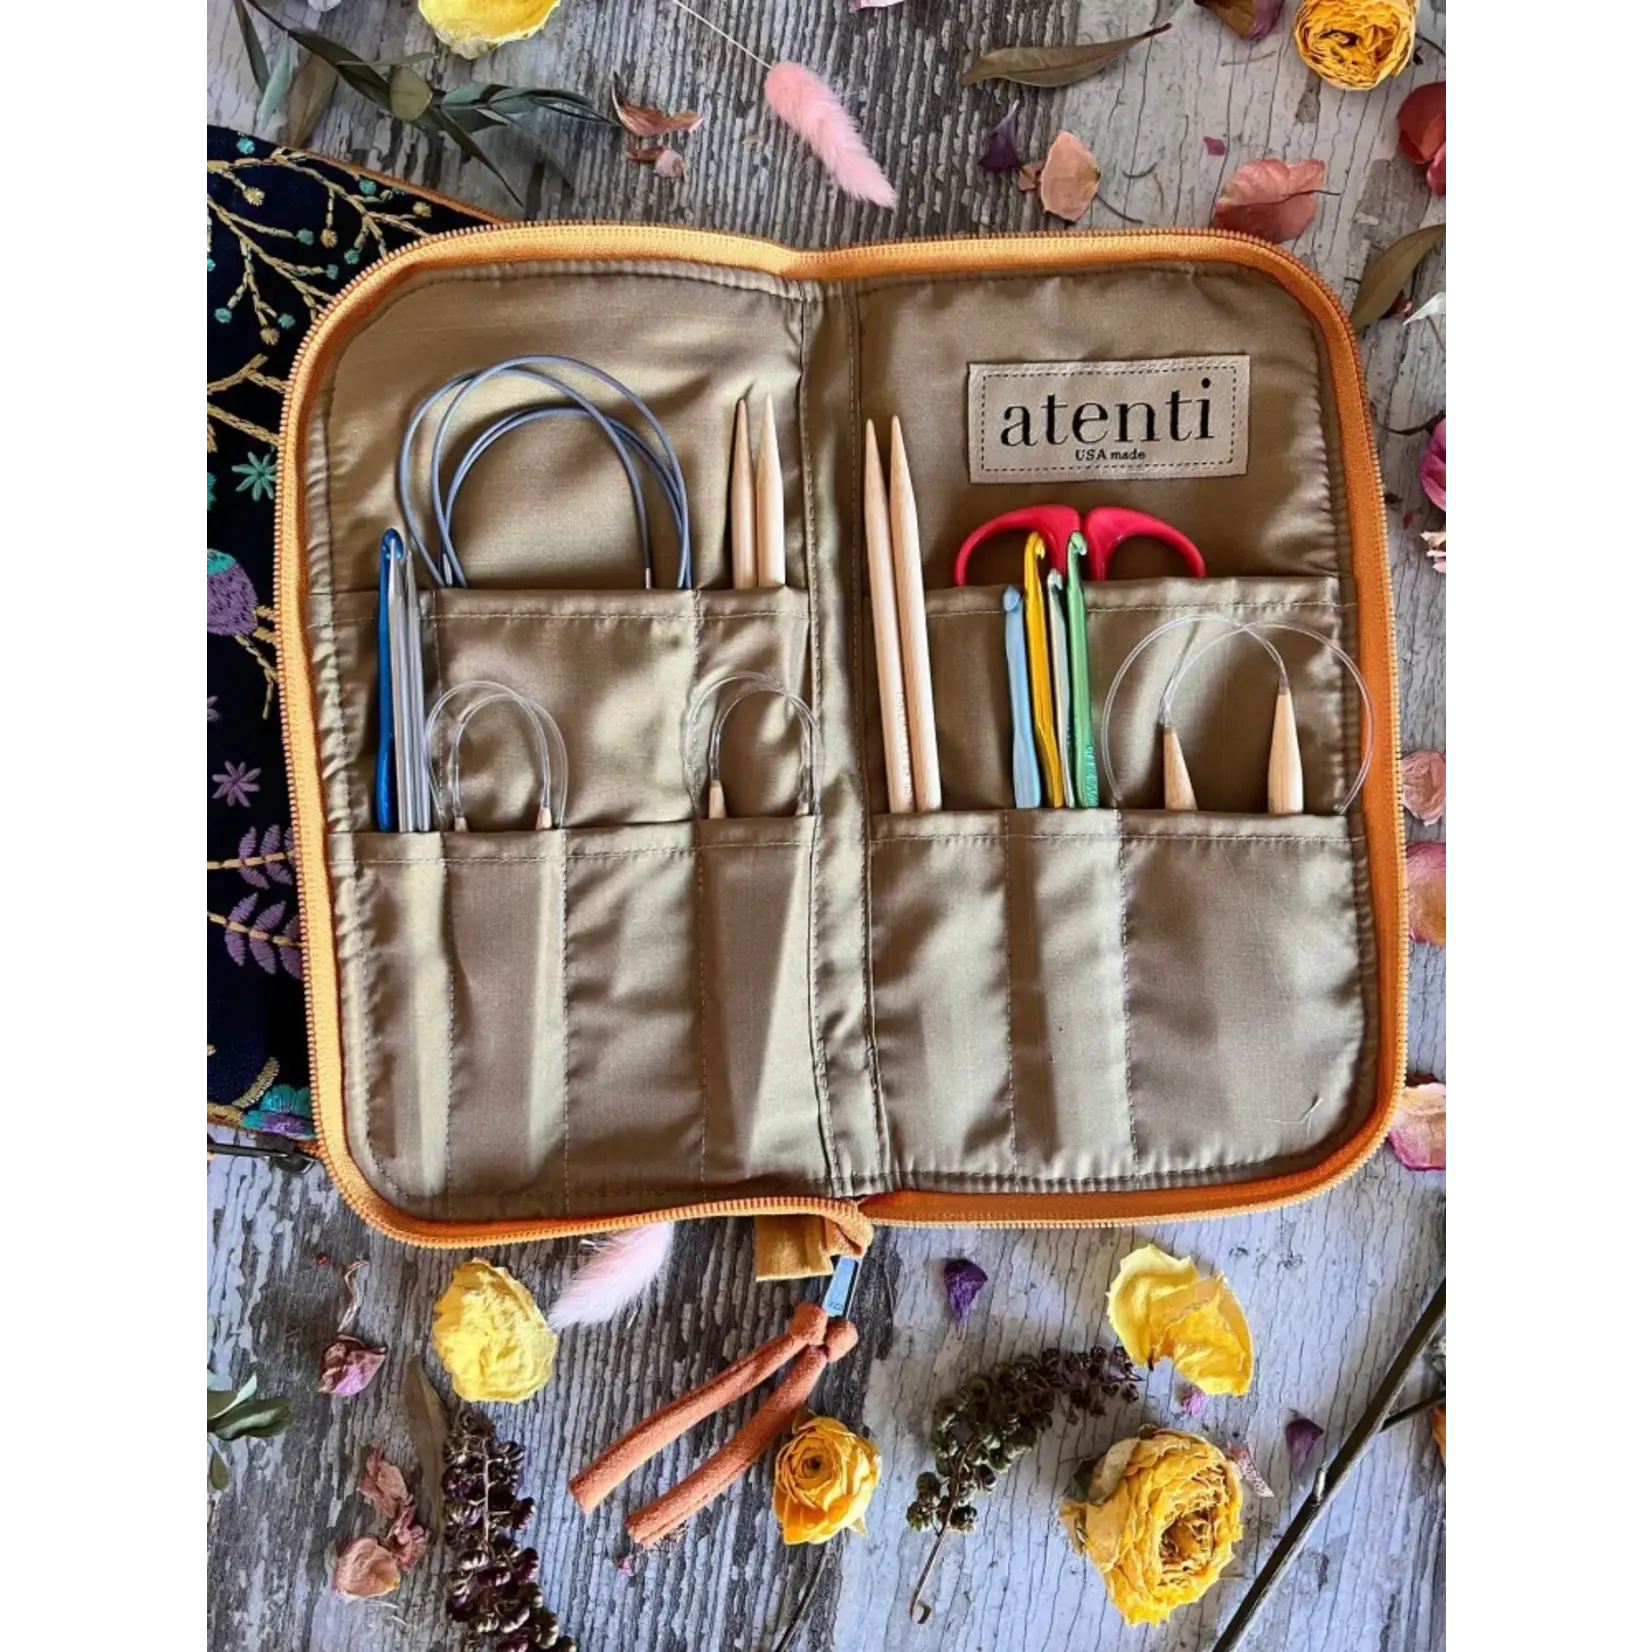 Atenti, Inc. Spot on Night Case for Needles, Hooks and Tools